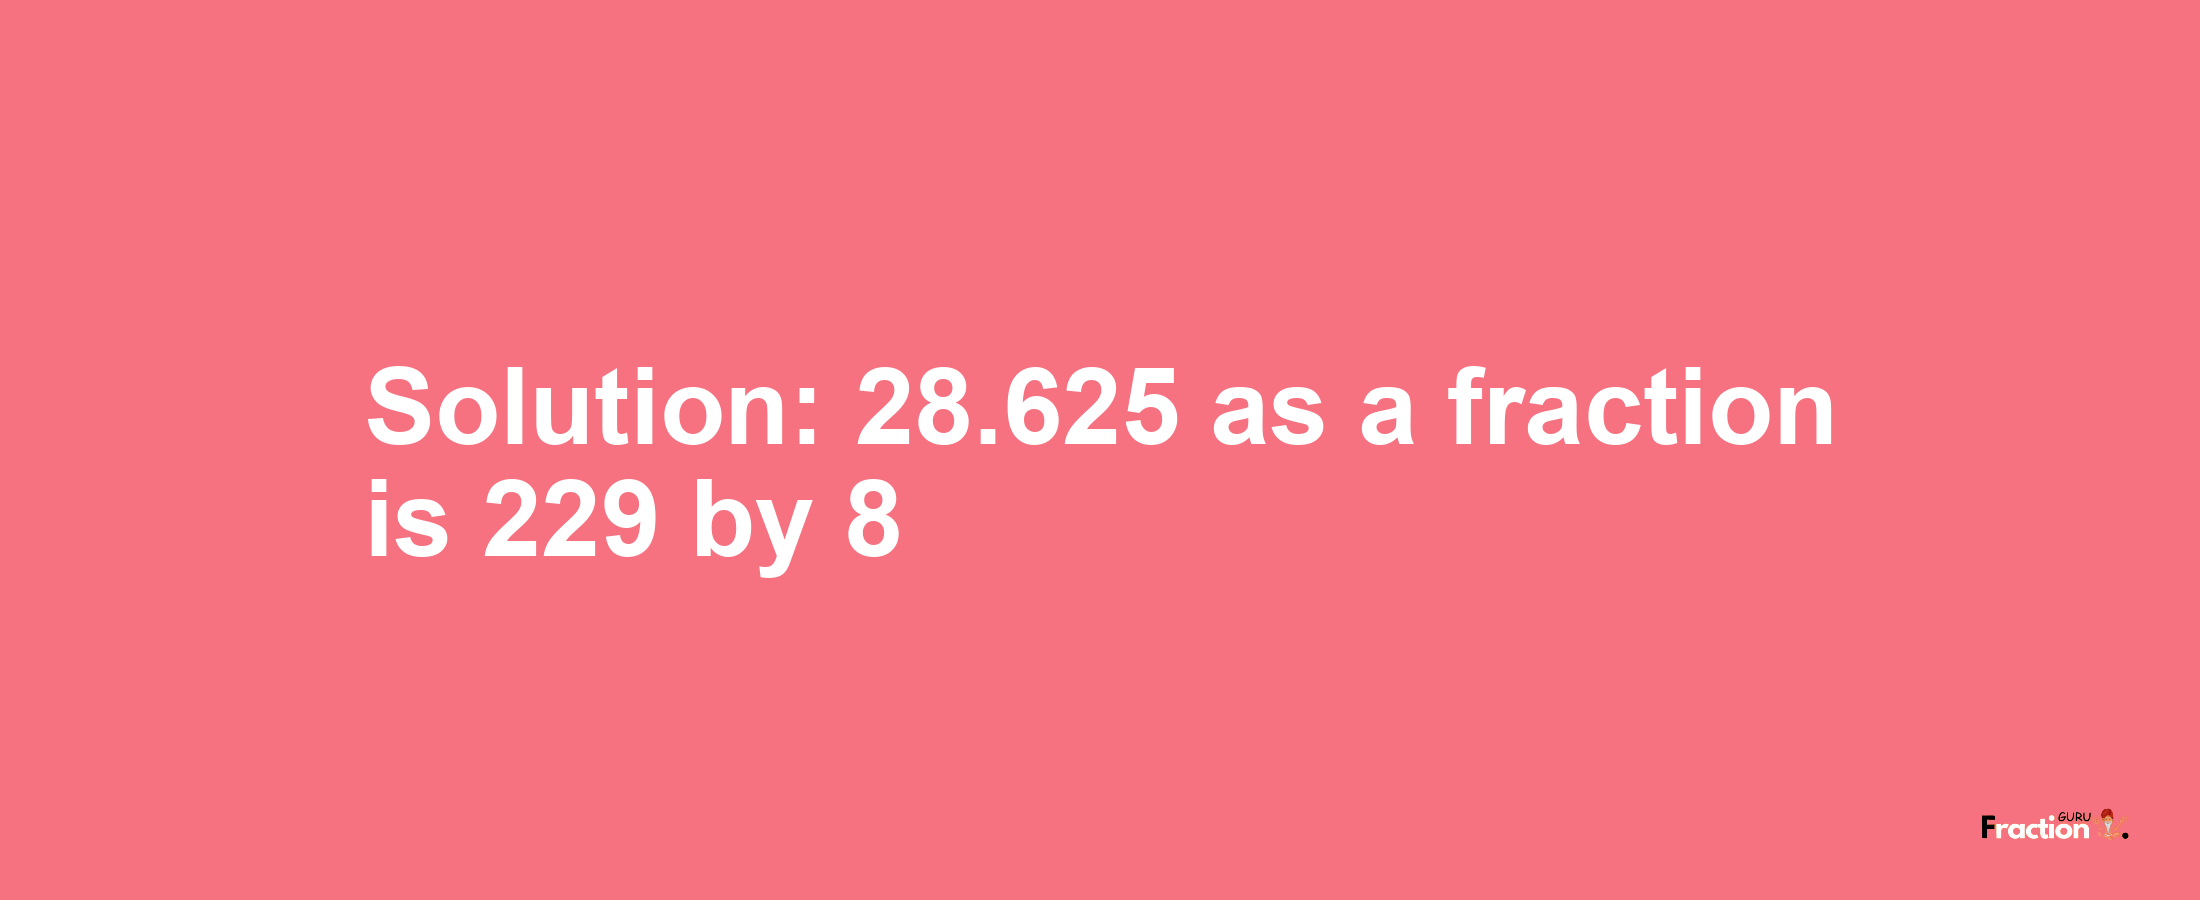 Solution:28.625 as a fraction is 229/8